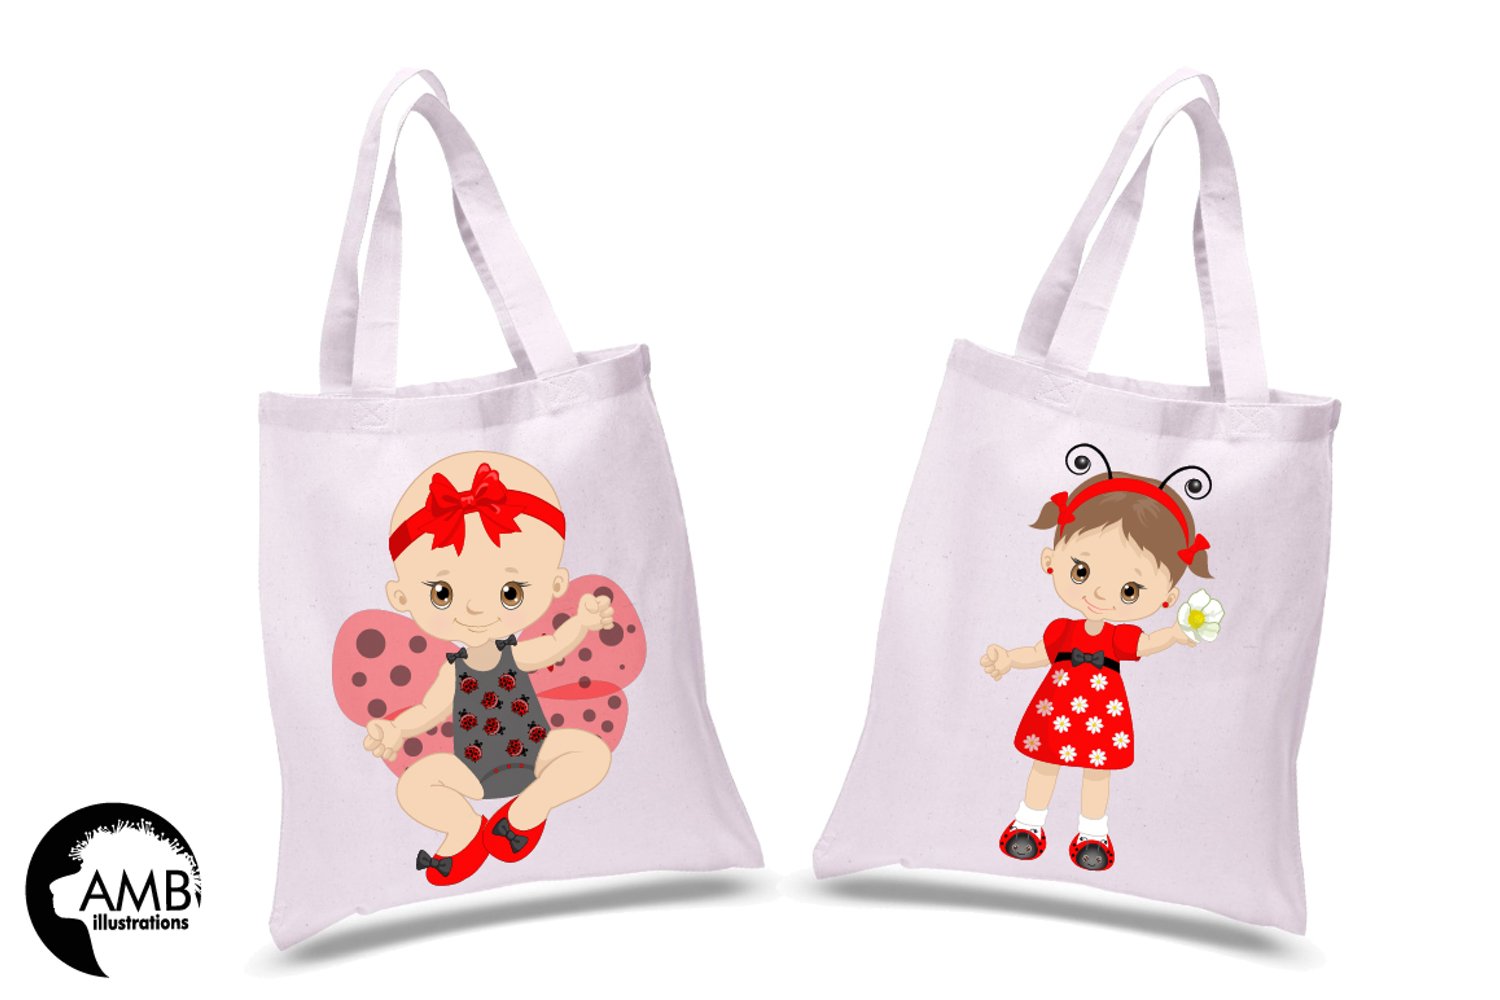 Shopping bag preview.